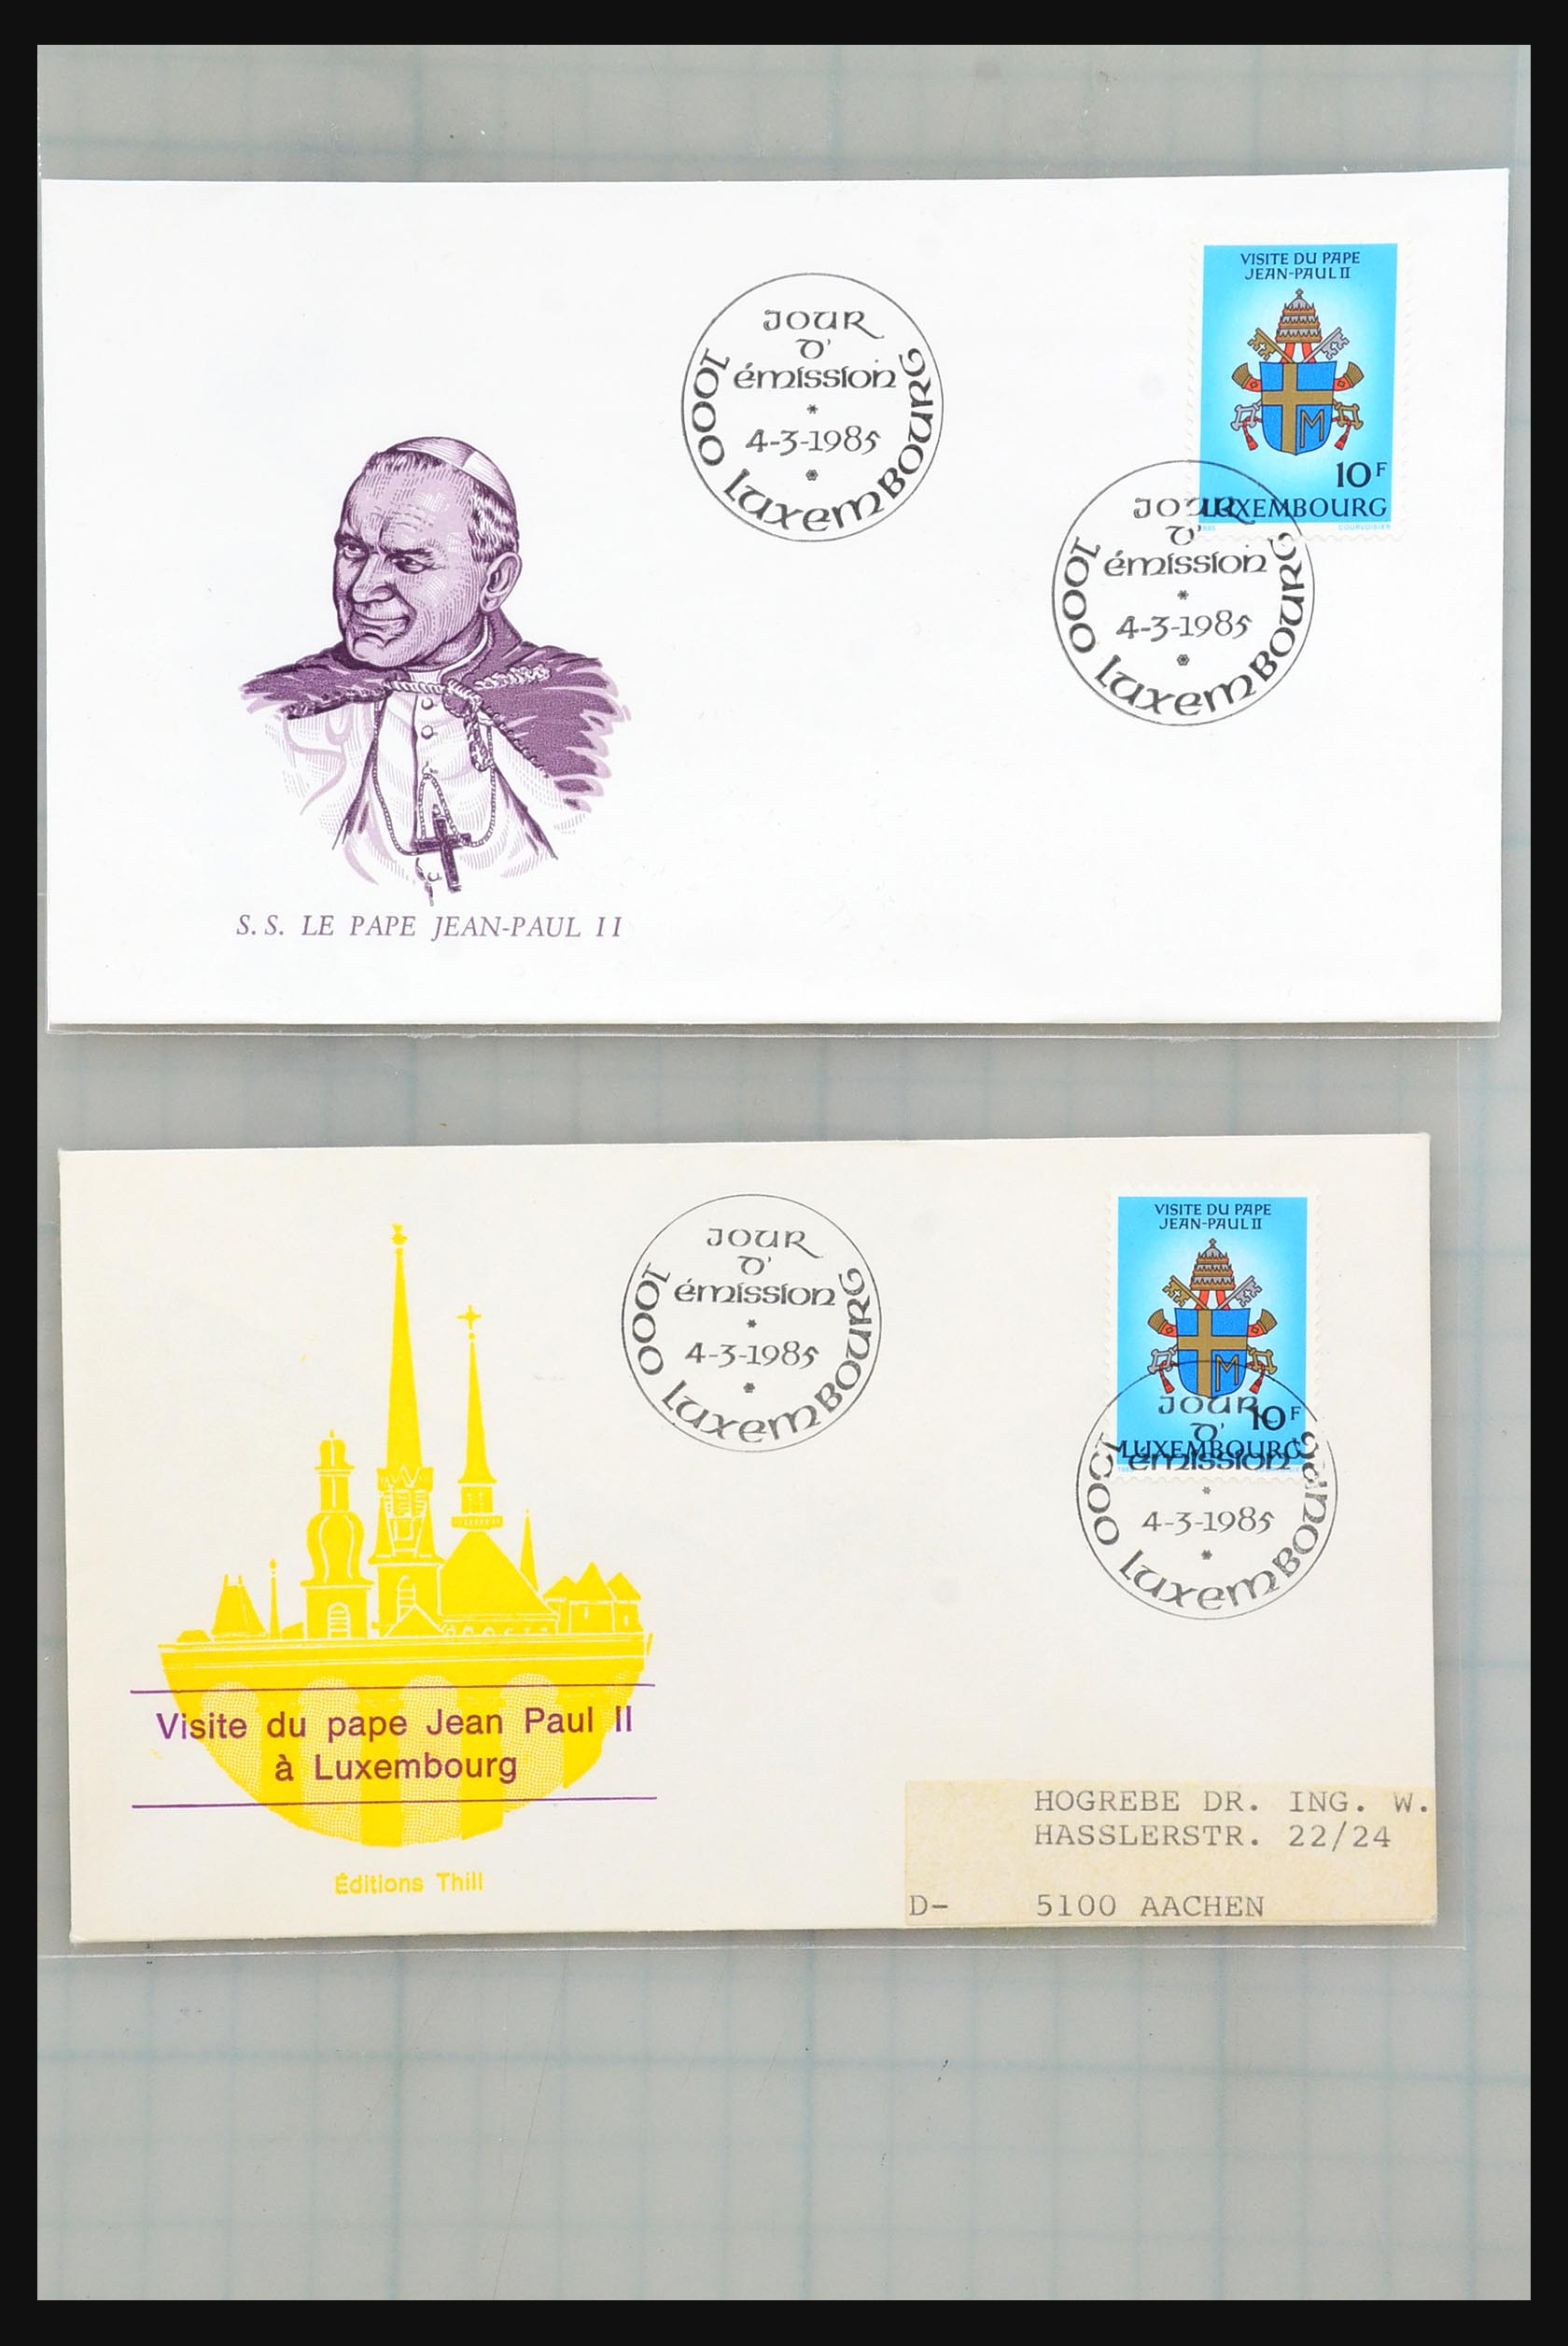 31358 001 - 31358 Portugal/Luxemburg/Greece covers 1880-1960.